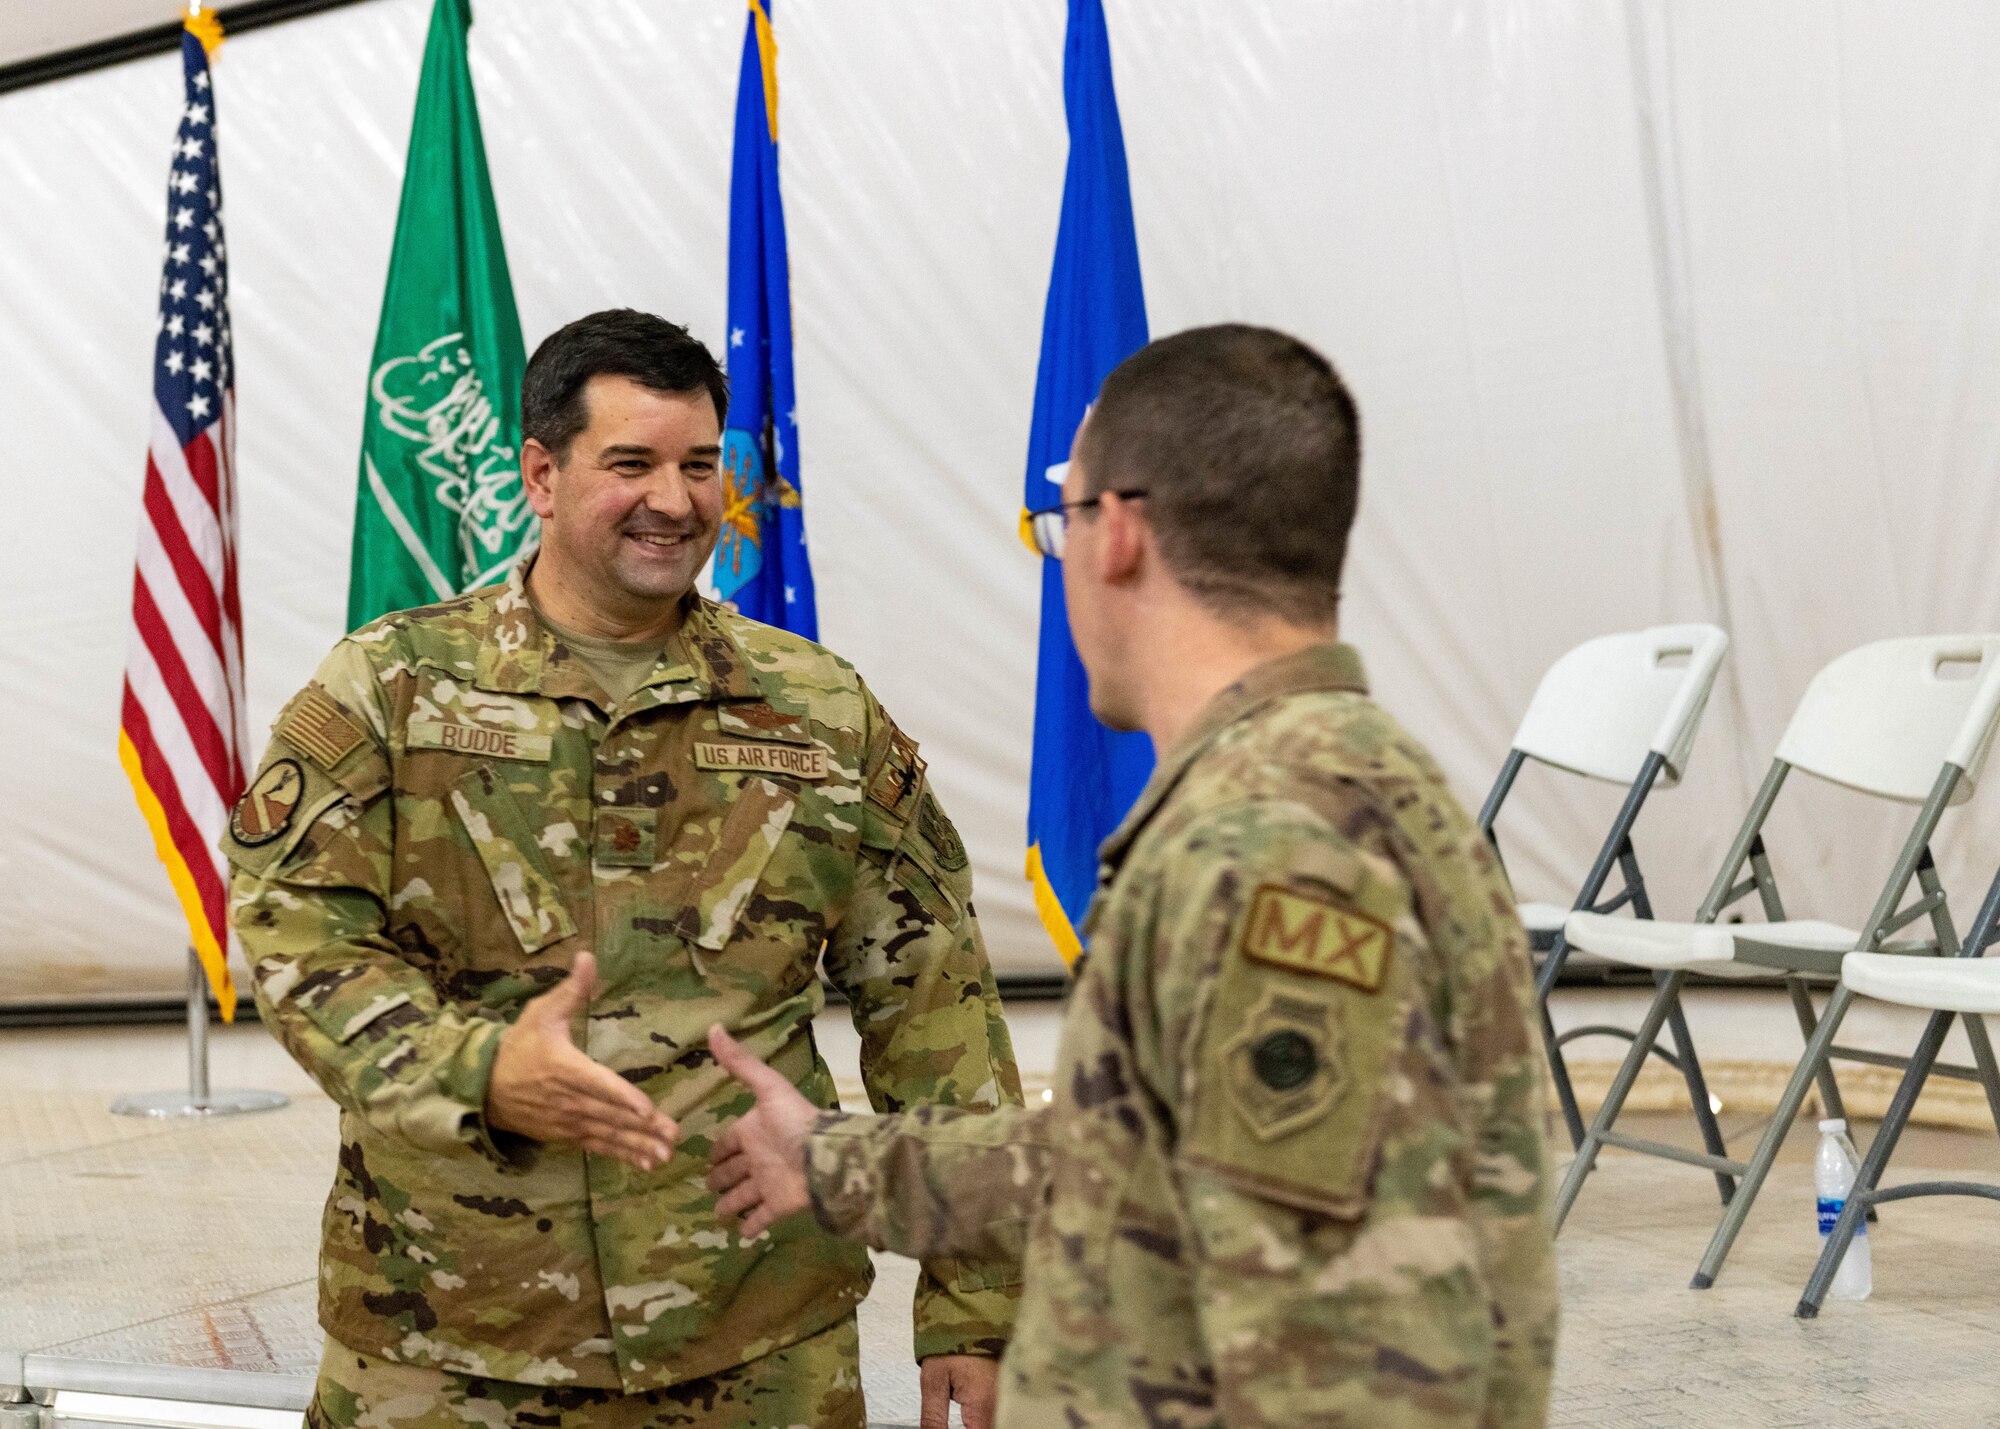 908th EARS receives new commander